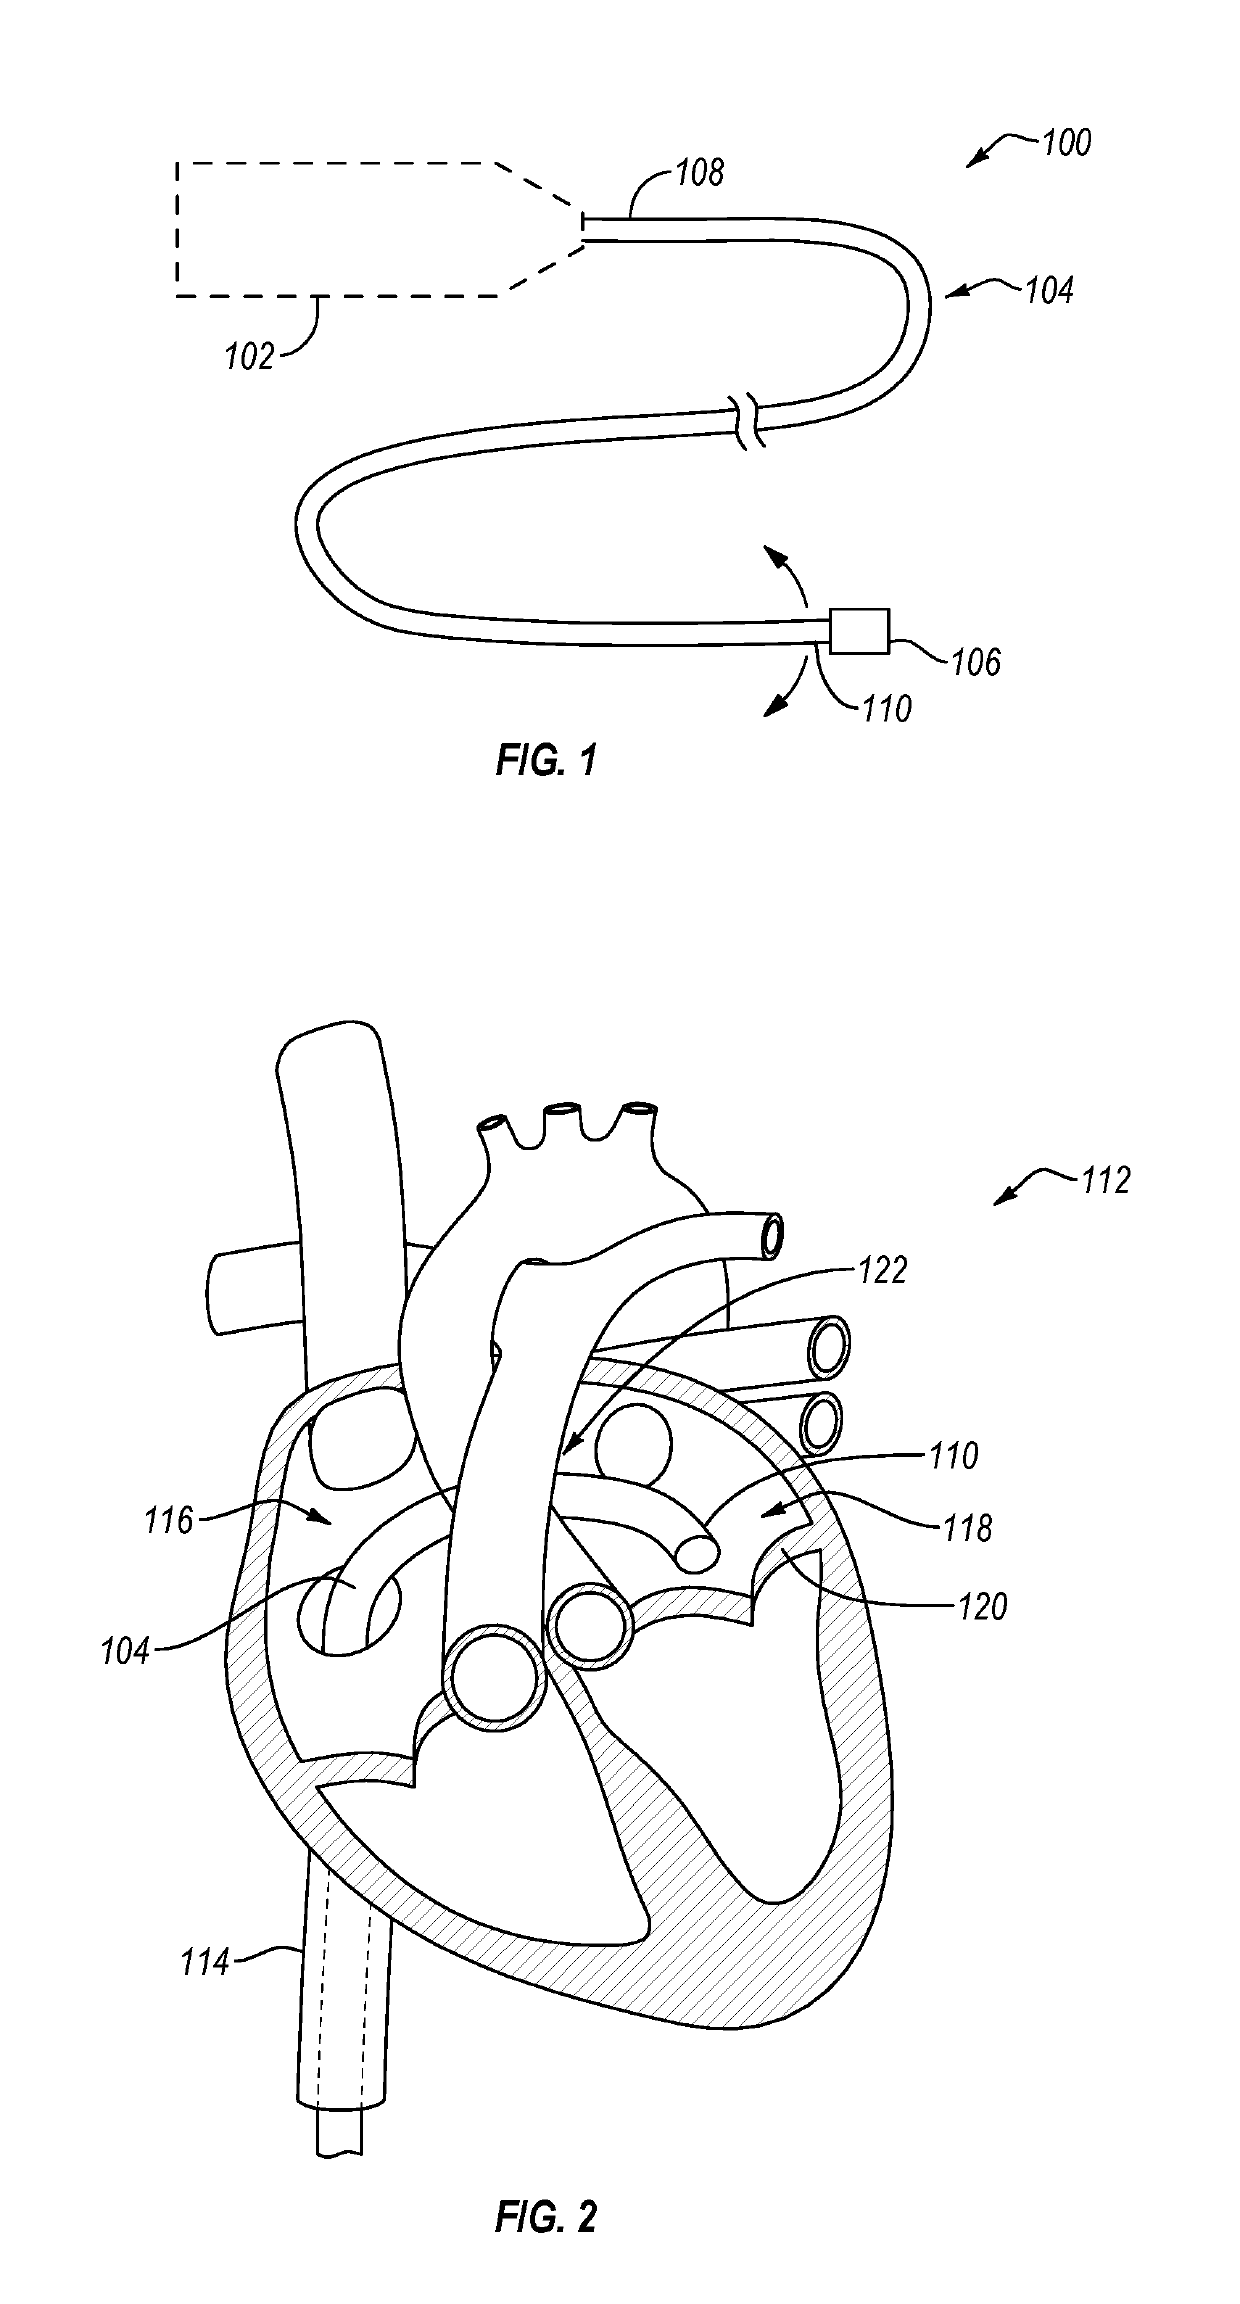 Cardiac implant delivery system